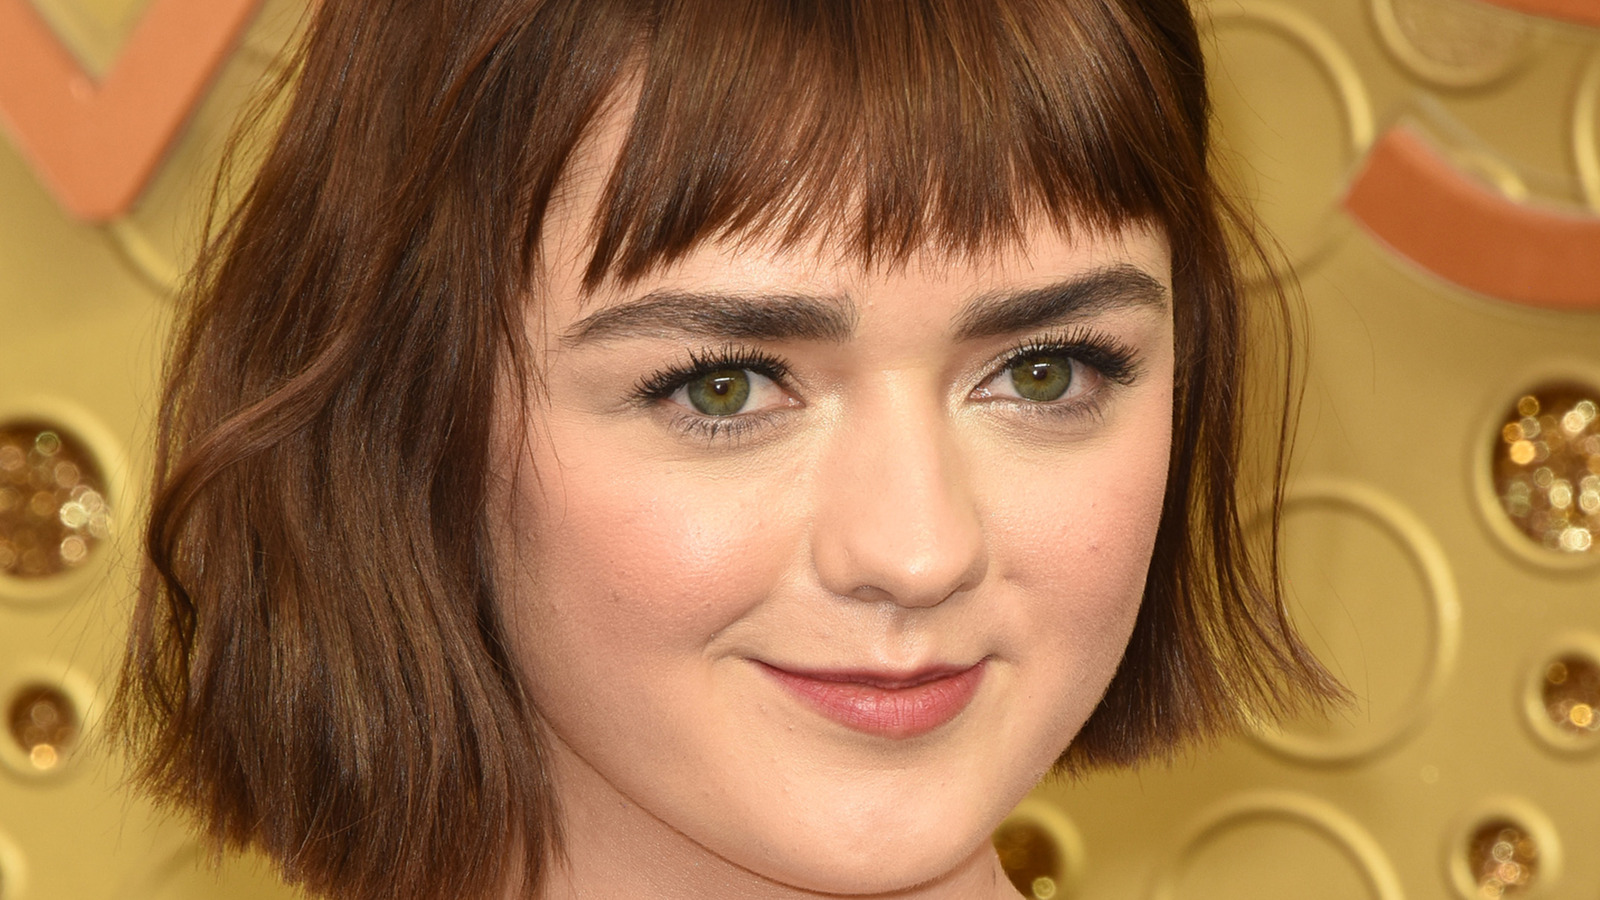 Sophie Turner Says Maisie Williams Will Be Maid of Honor at